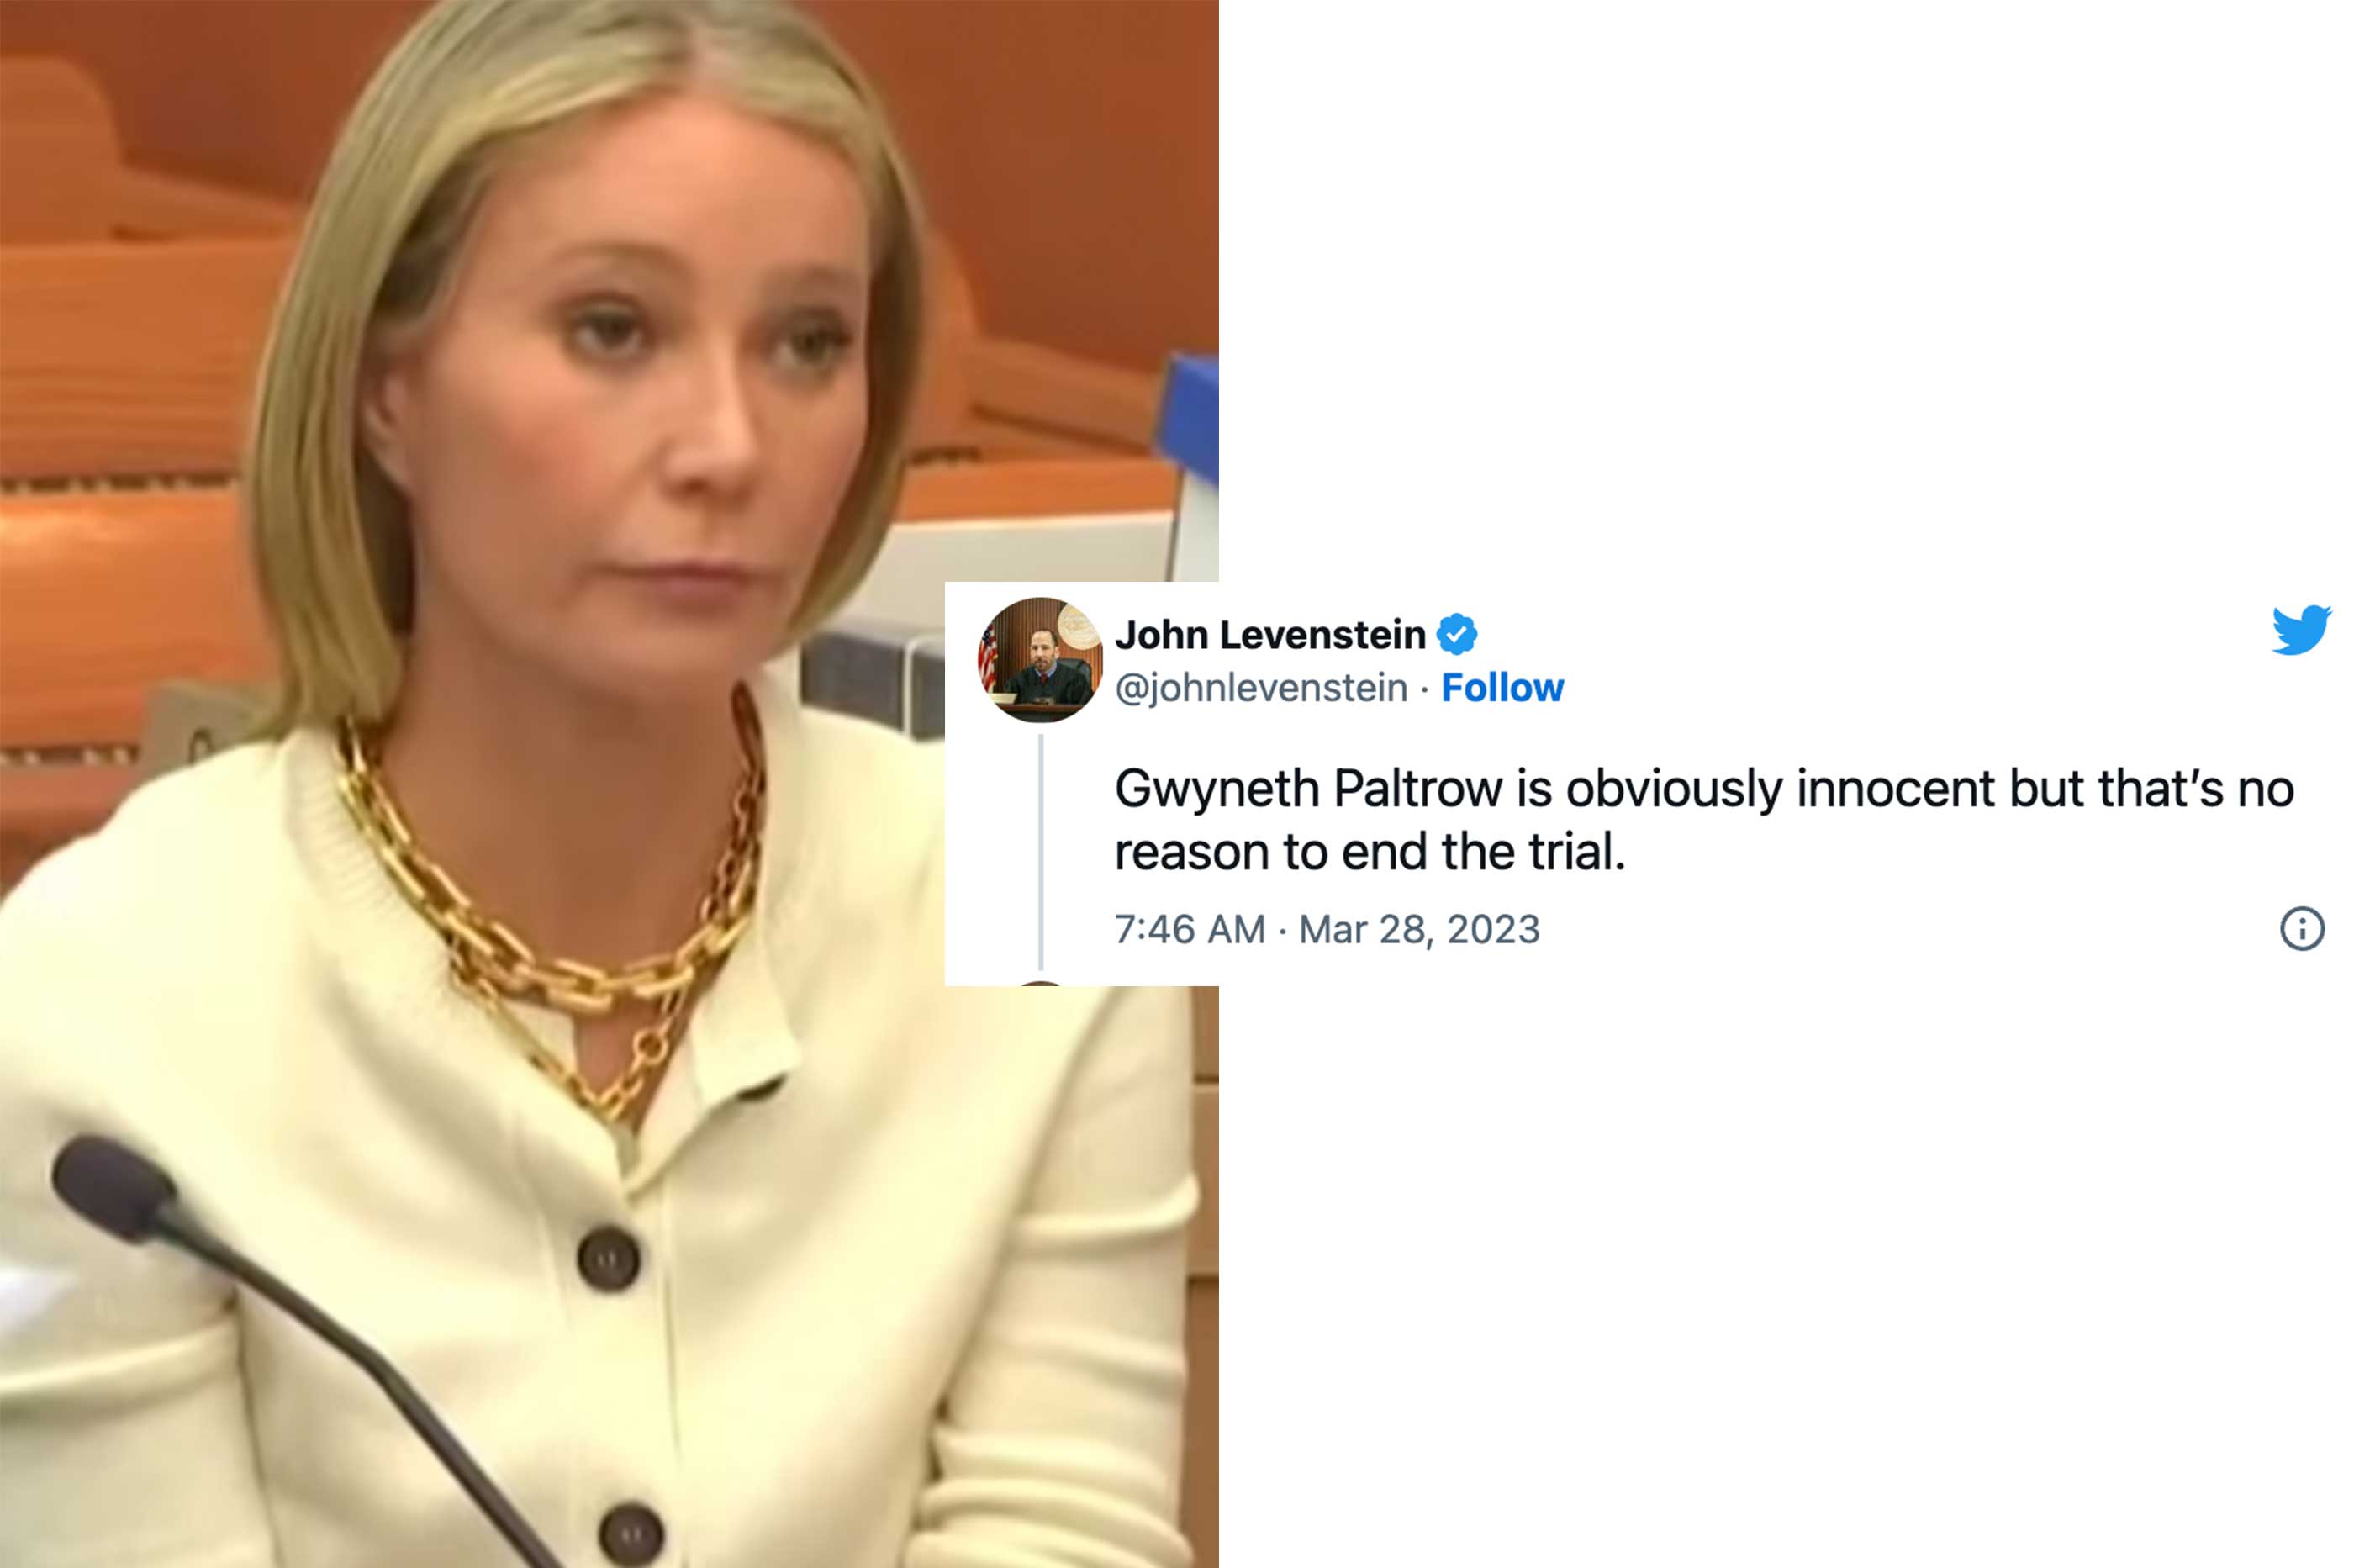 Gwyneth Paltrow's courtroom style